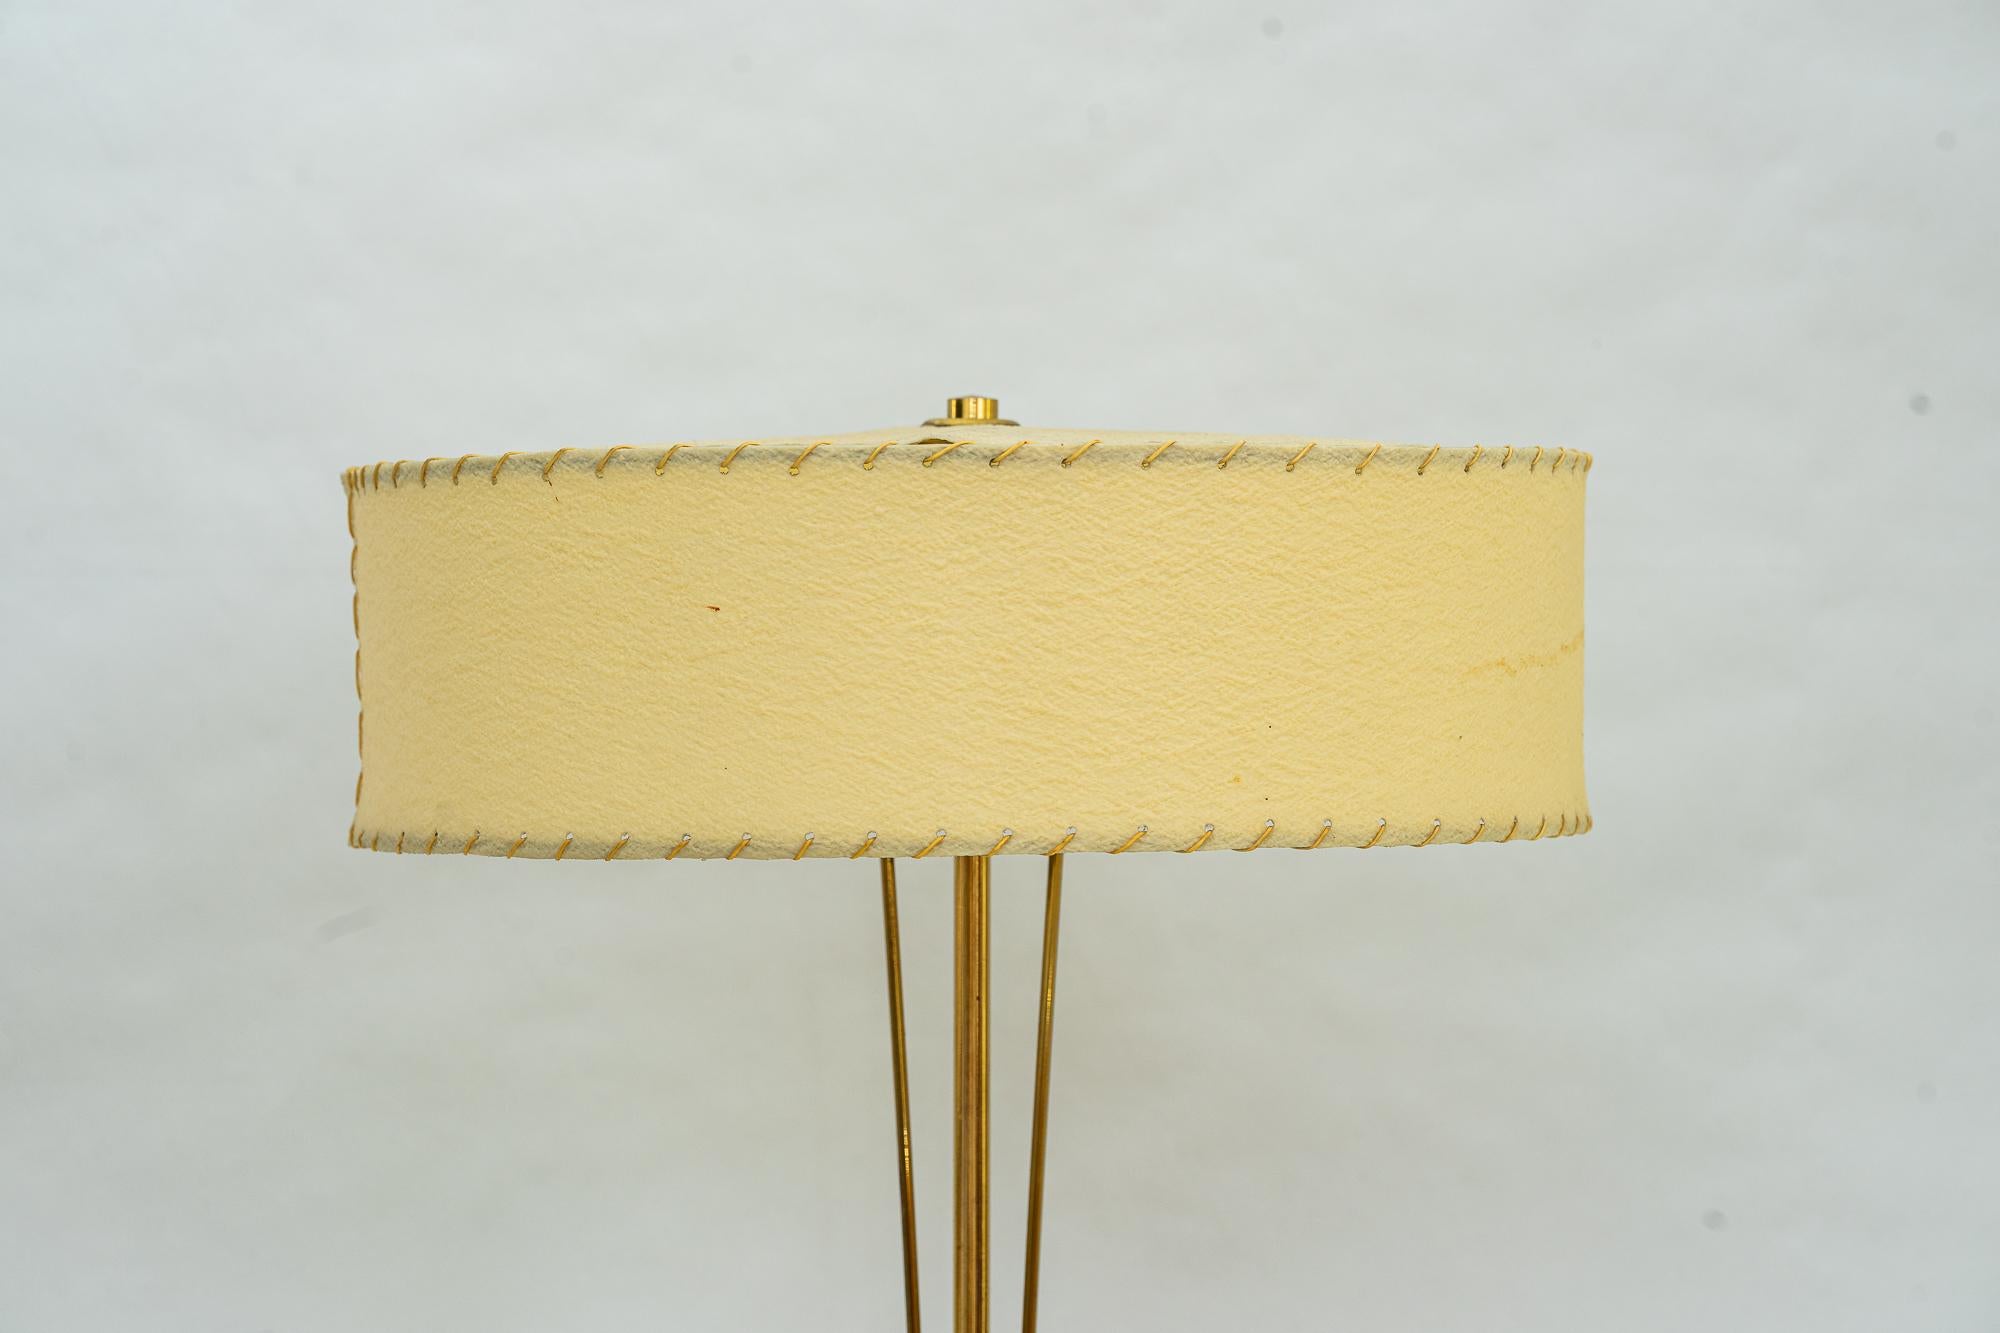 Rupert Nikoll table lamp vienna around 1950s
The shade has a little damage see picture
Original condition